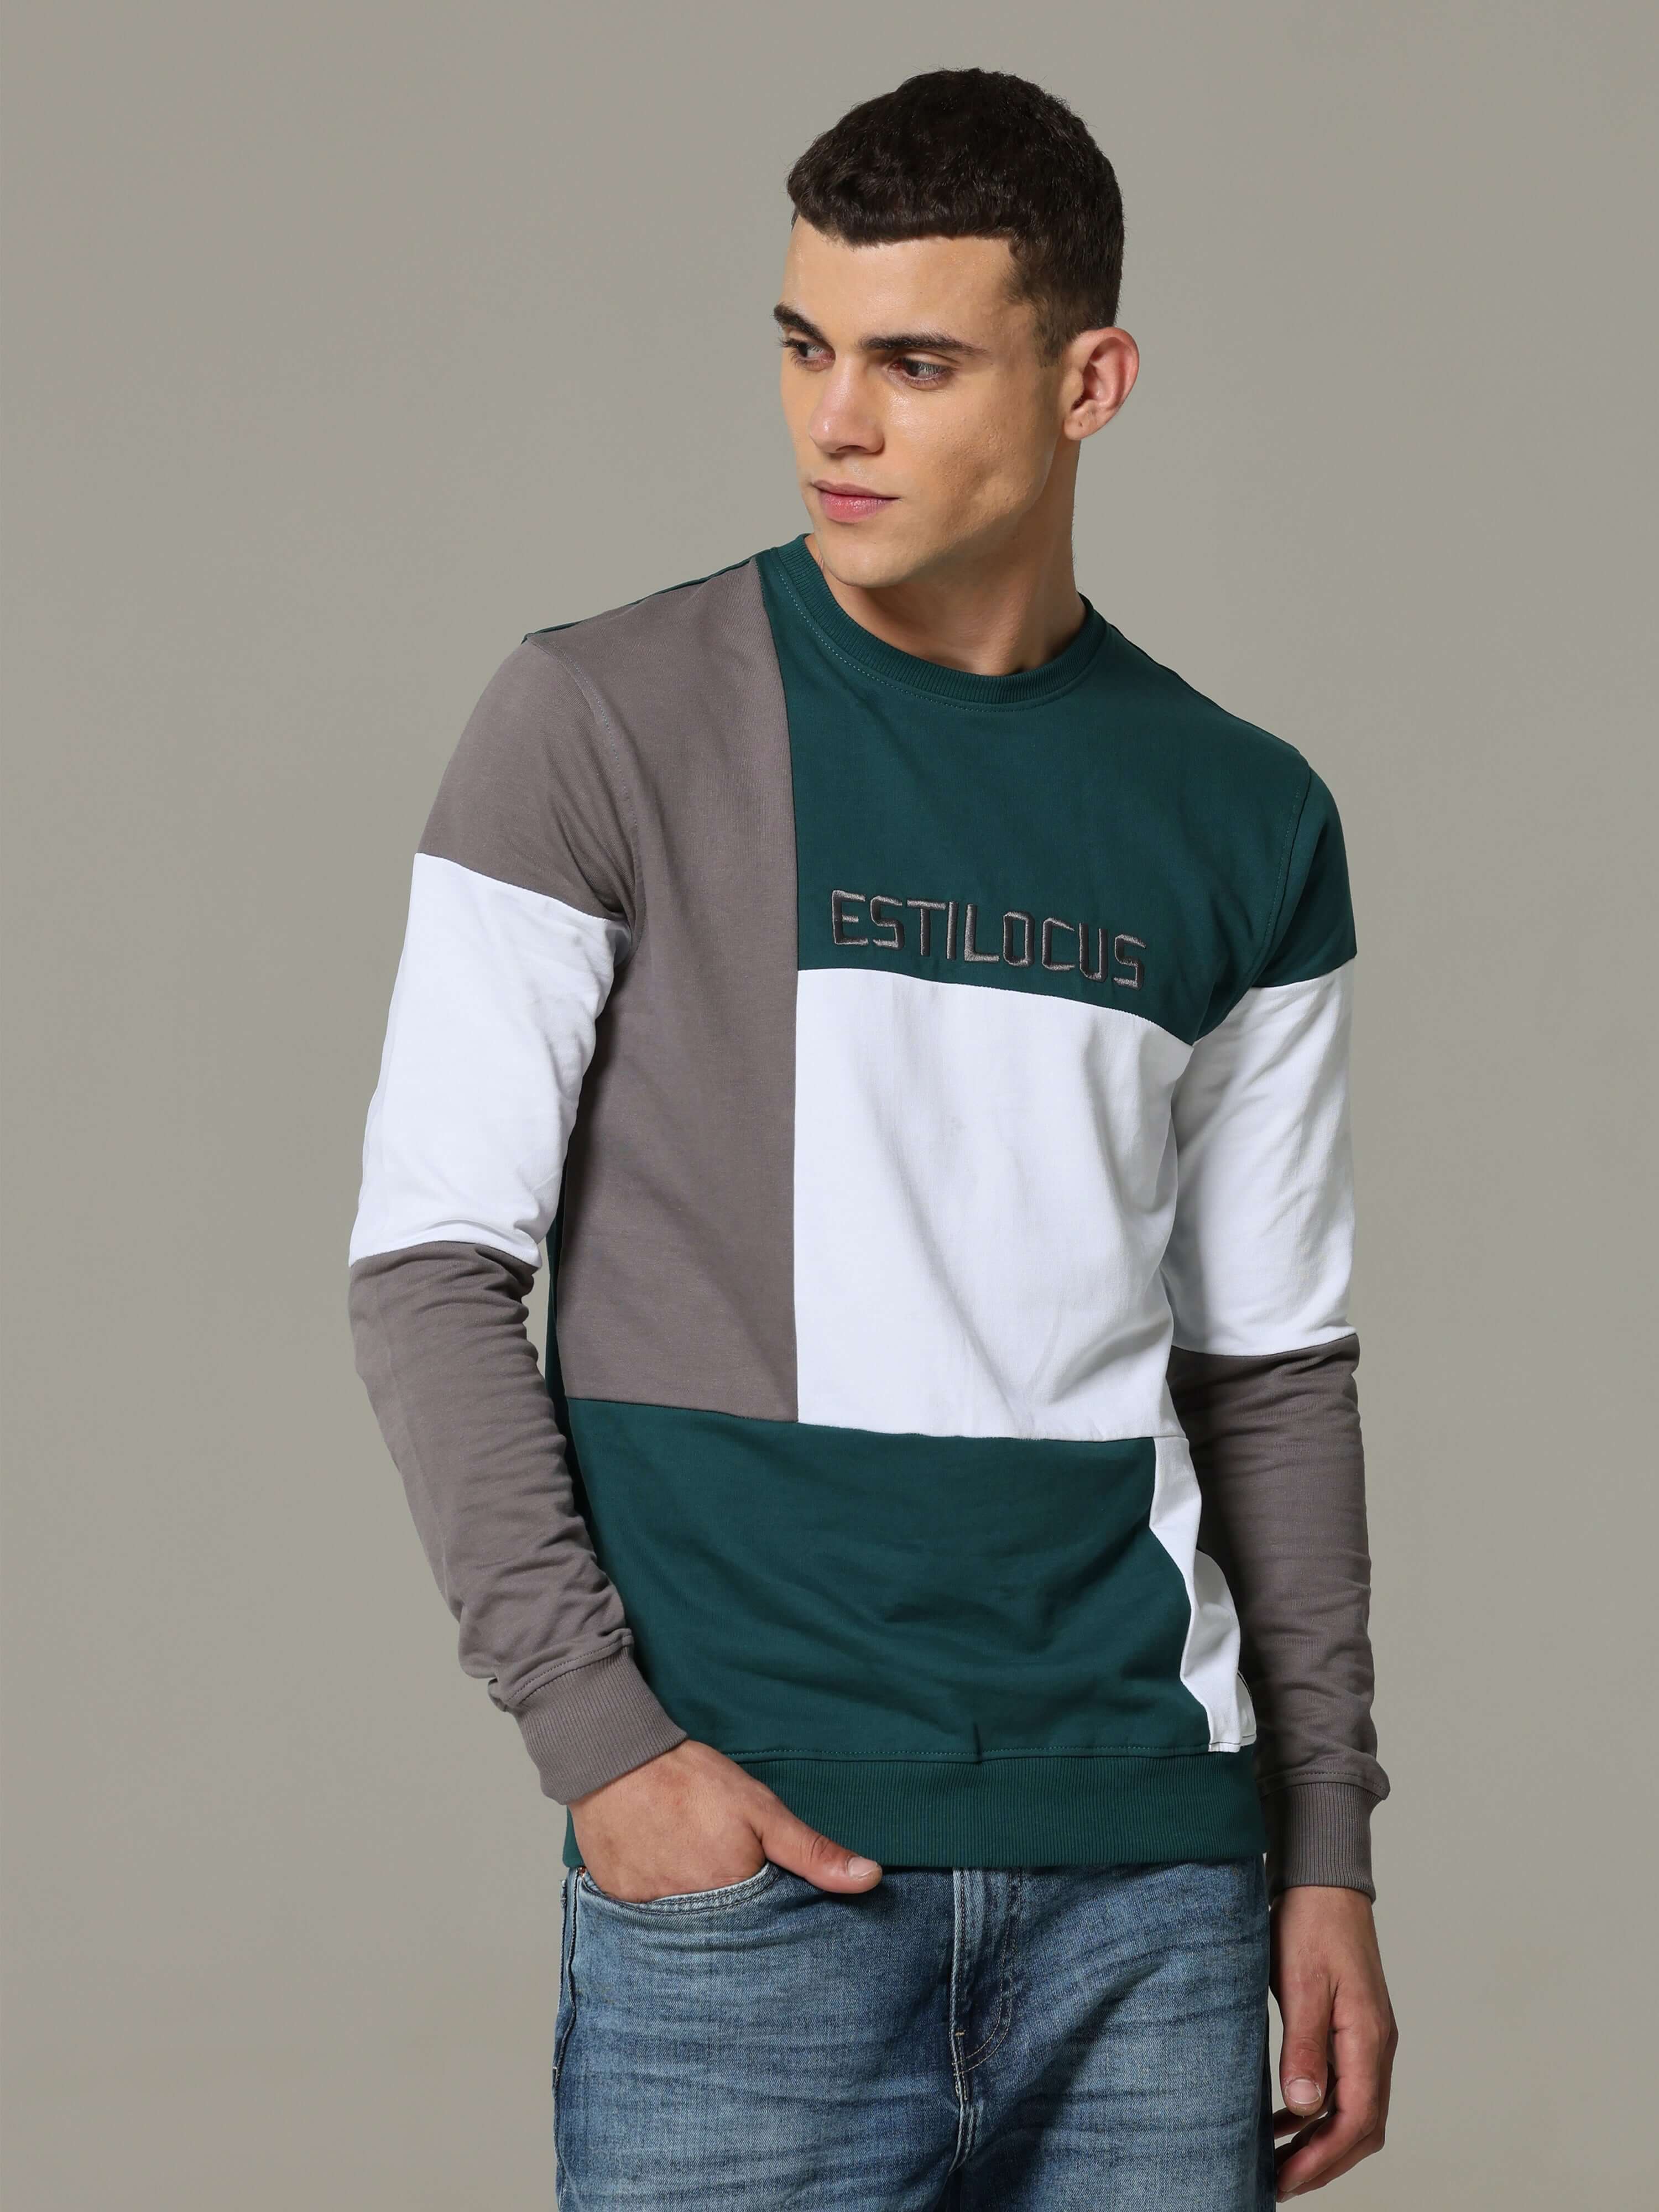 Patterned Crew Neck Teal Sweat Shirt shop online at Estilocus. • Crew neck • Long sleeve • Ribbing around neckline, Cuff & hem • High quality print and fine embroidery Fit : Comfort fit Size : The model is wearing M size Model height : 6 Feet Wash care :